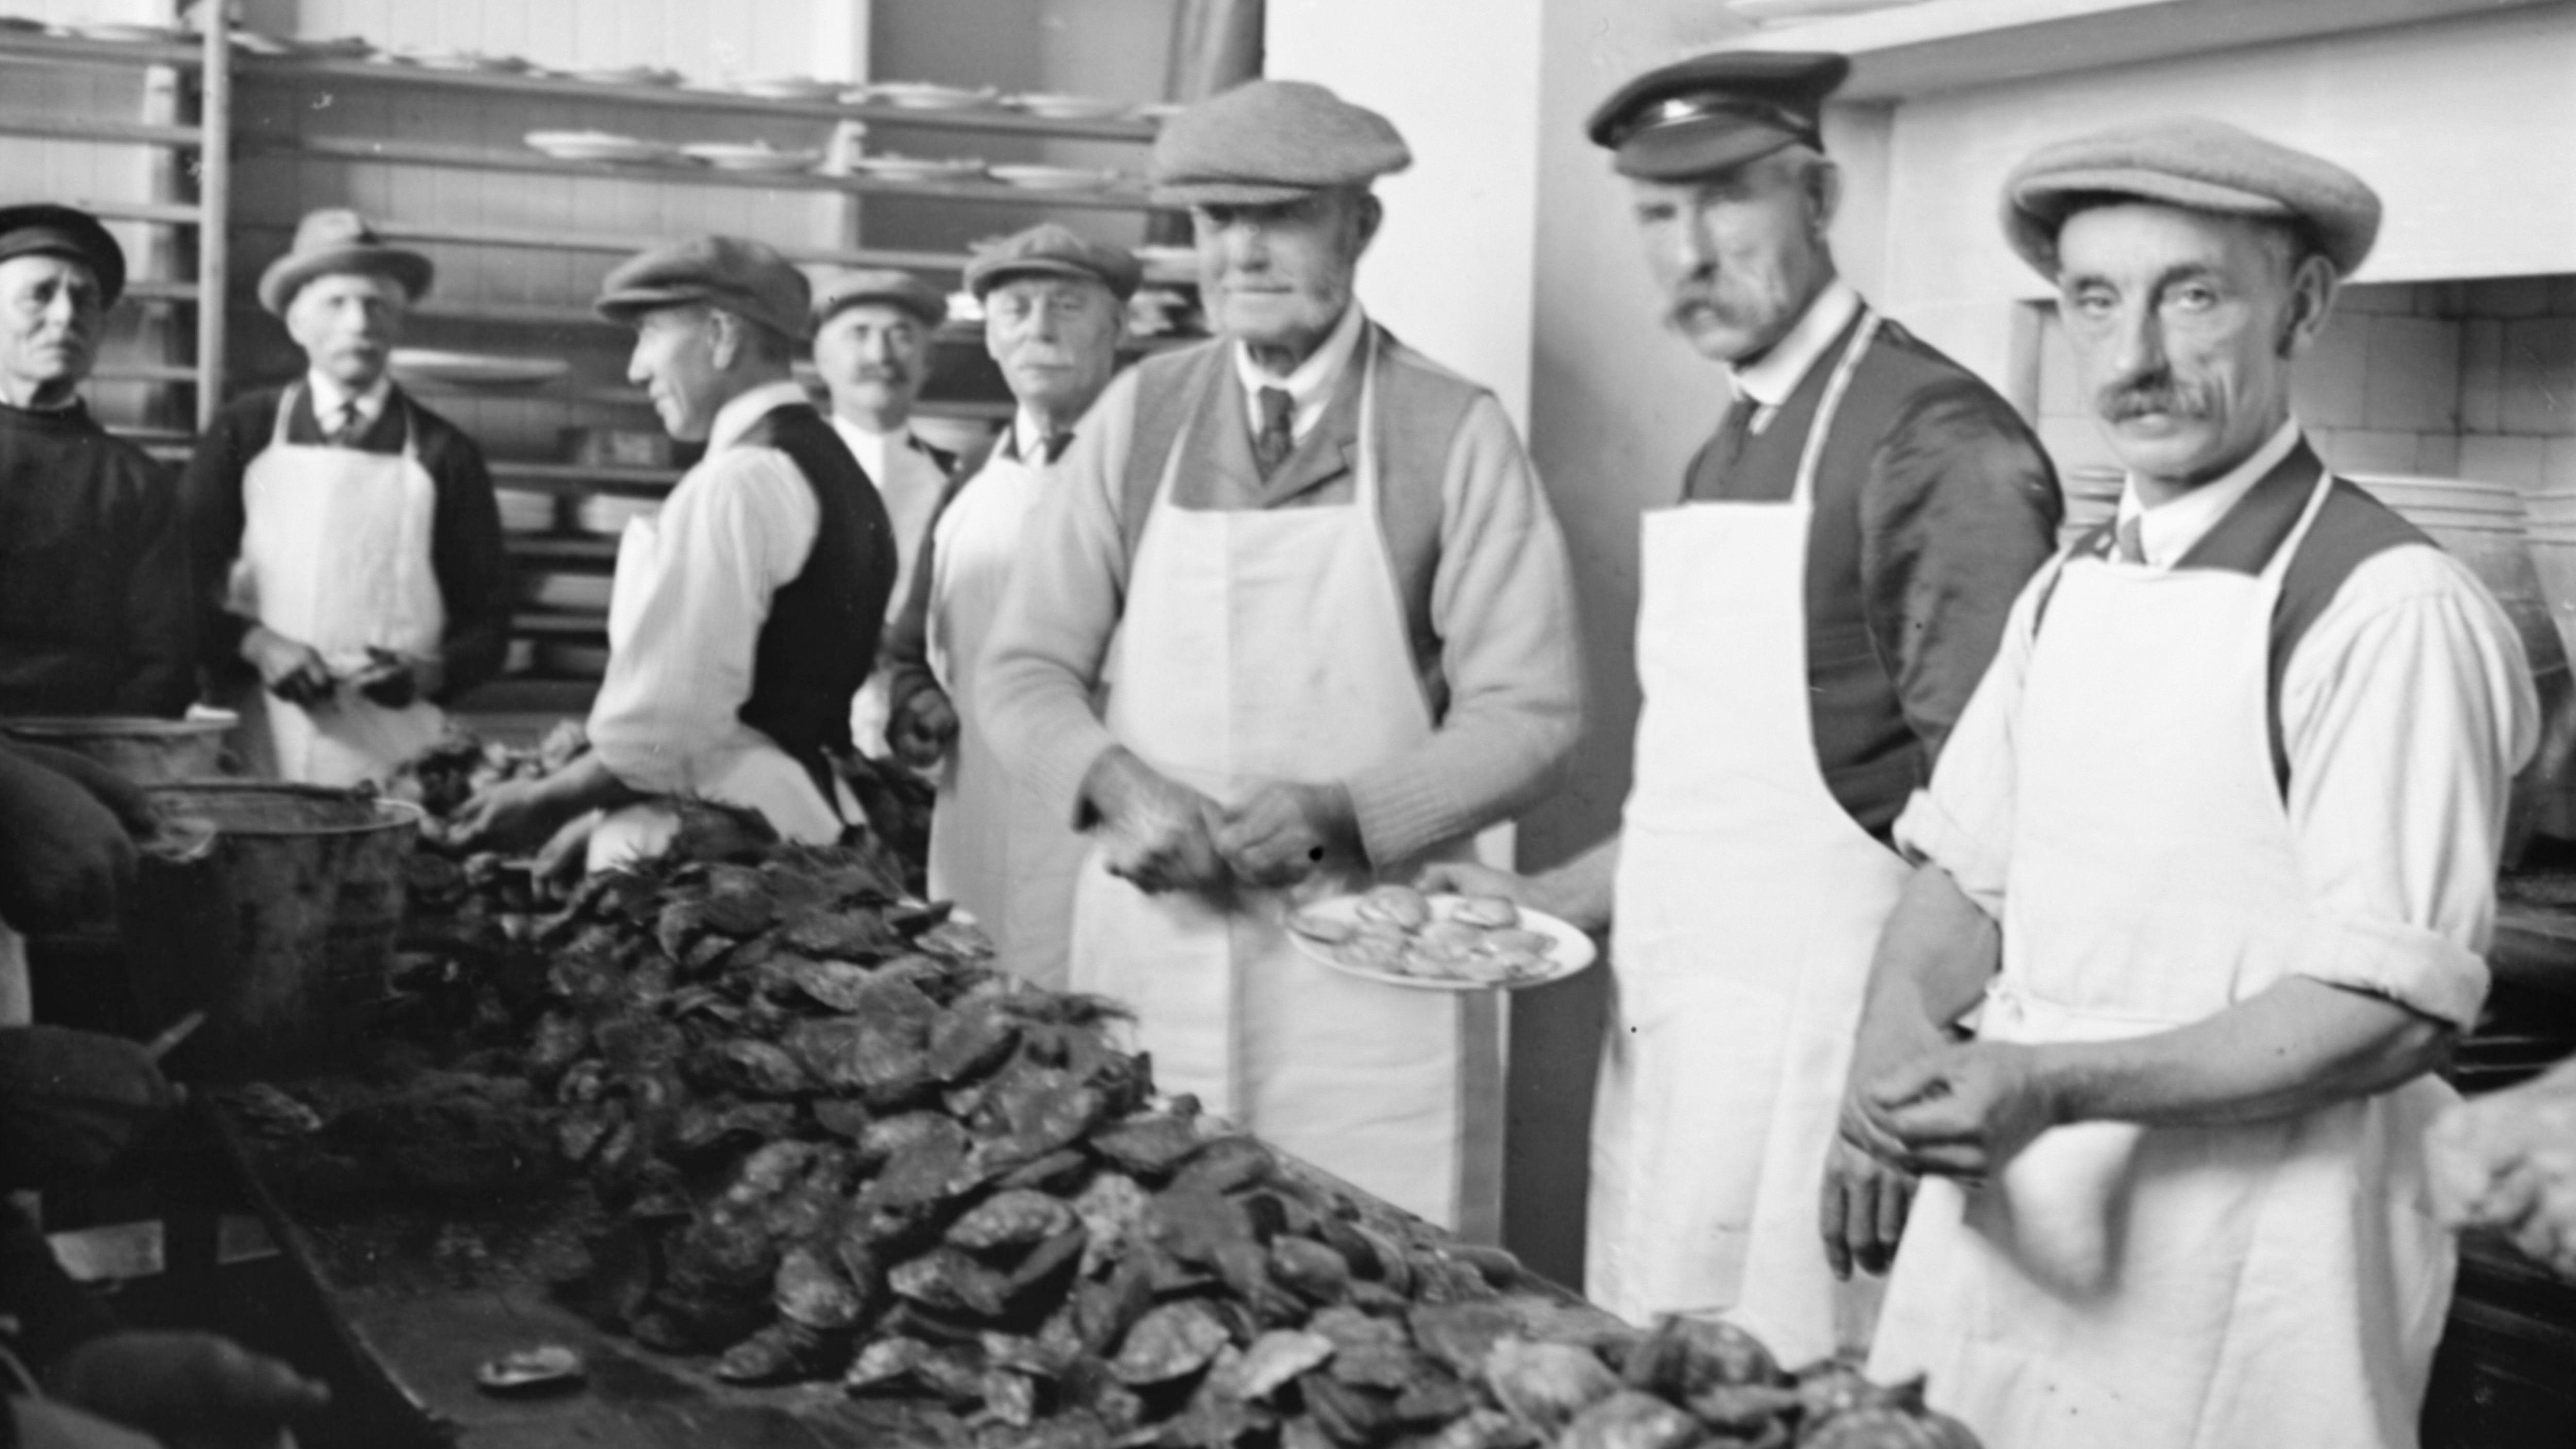 An army of men were employed in Colchester in the 1920s to open oysters for an annual festival